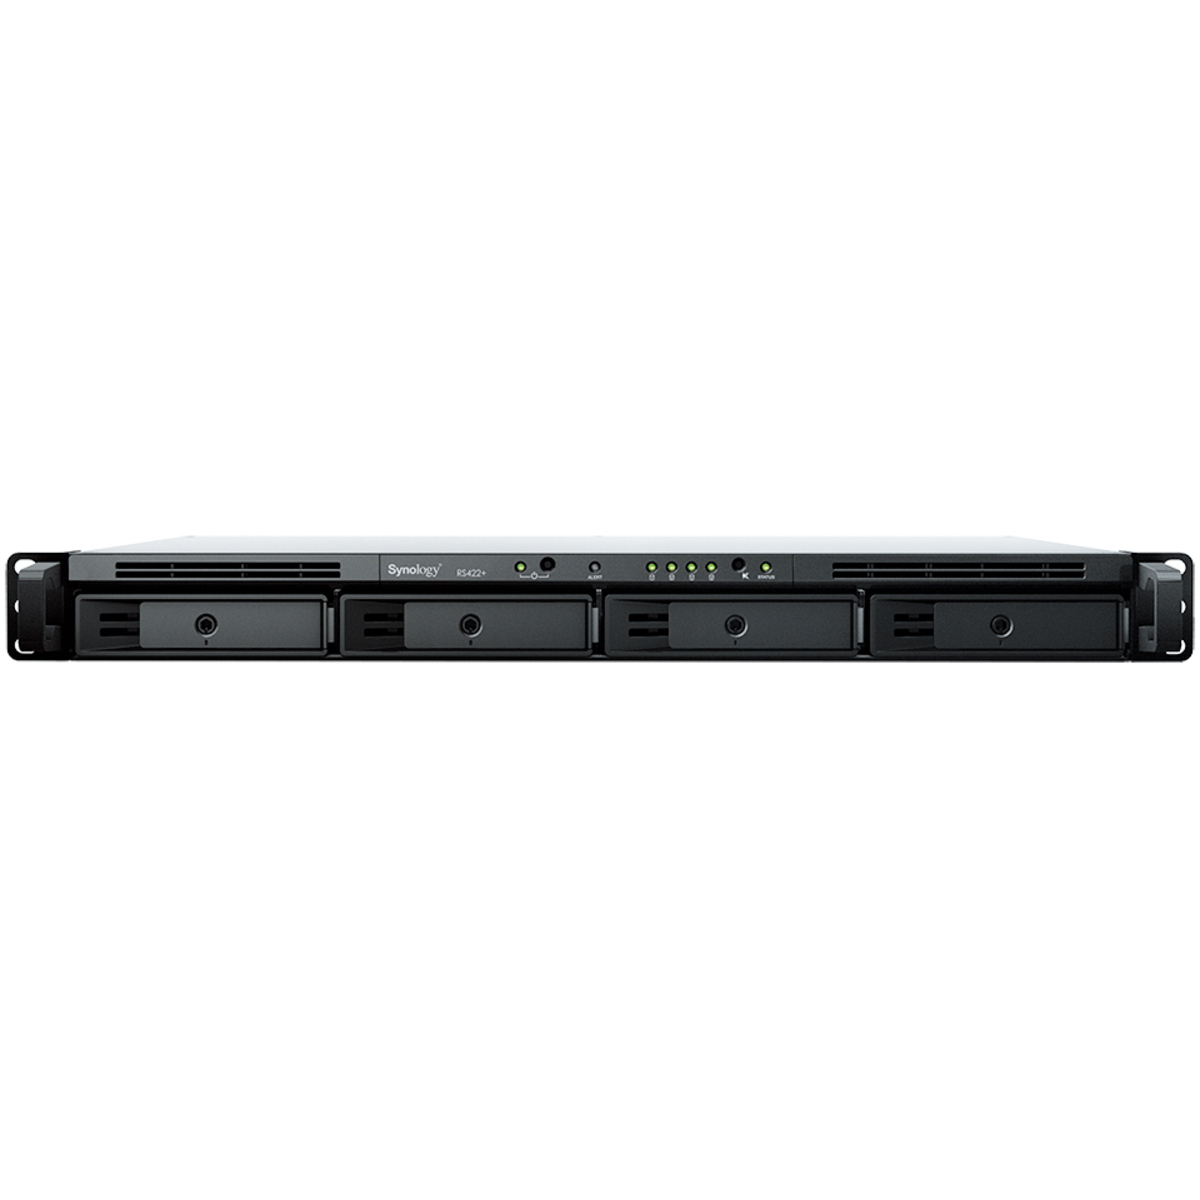 Synology RackStation RS422+ 64tb 4-Bay RackMount Personal / Basic Home / Small Office NAS - Network Attached Storage Device 4x16tb Seagate EXOS X18 ST16000NM000J 3.5 7200rpm SATA 6Gb/s HDD ENTERPRISE Class Drives Installed - Burn-In Tested RackStation RS422+